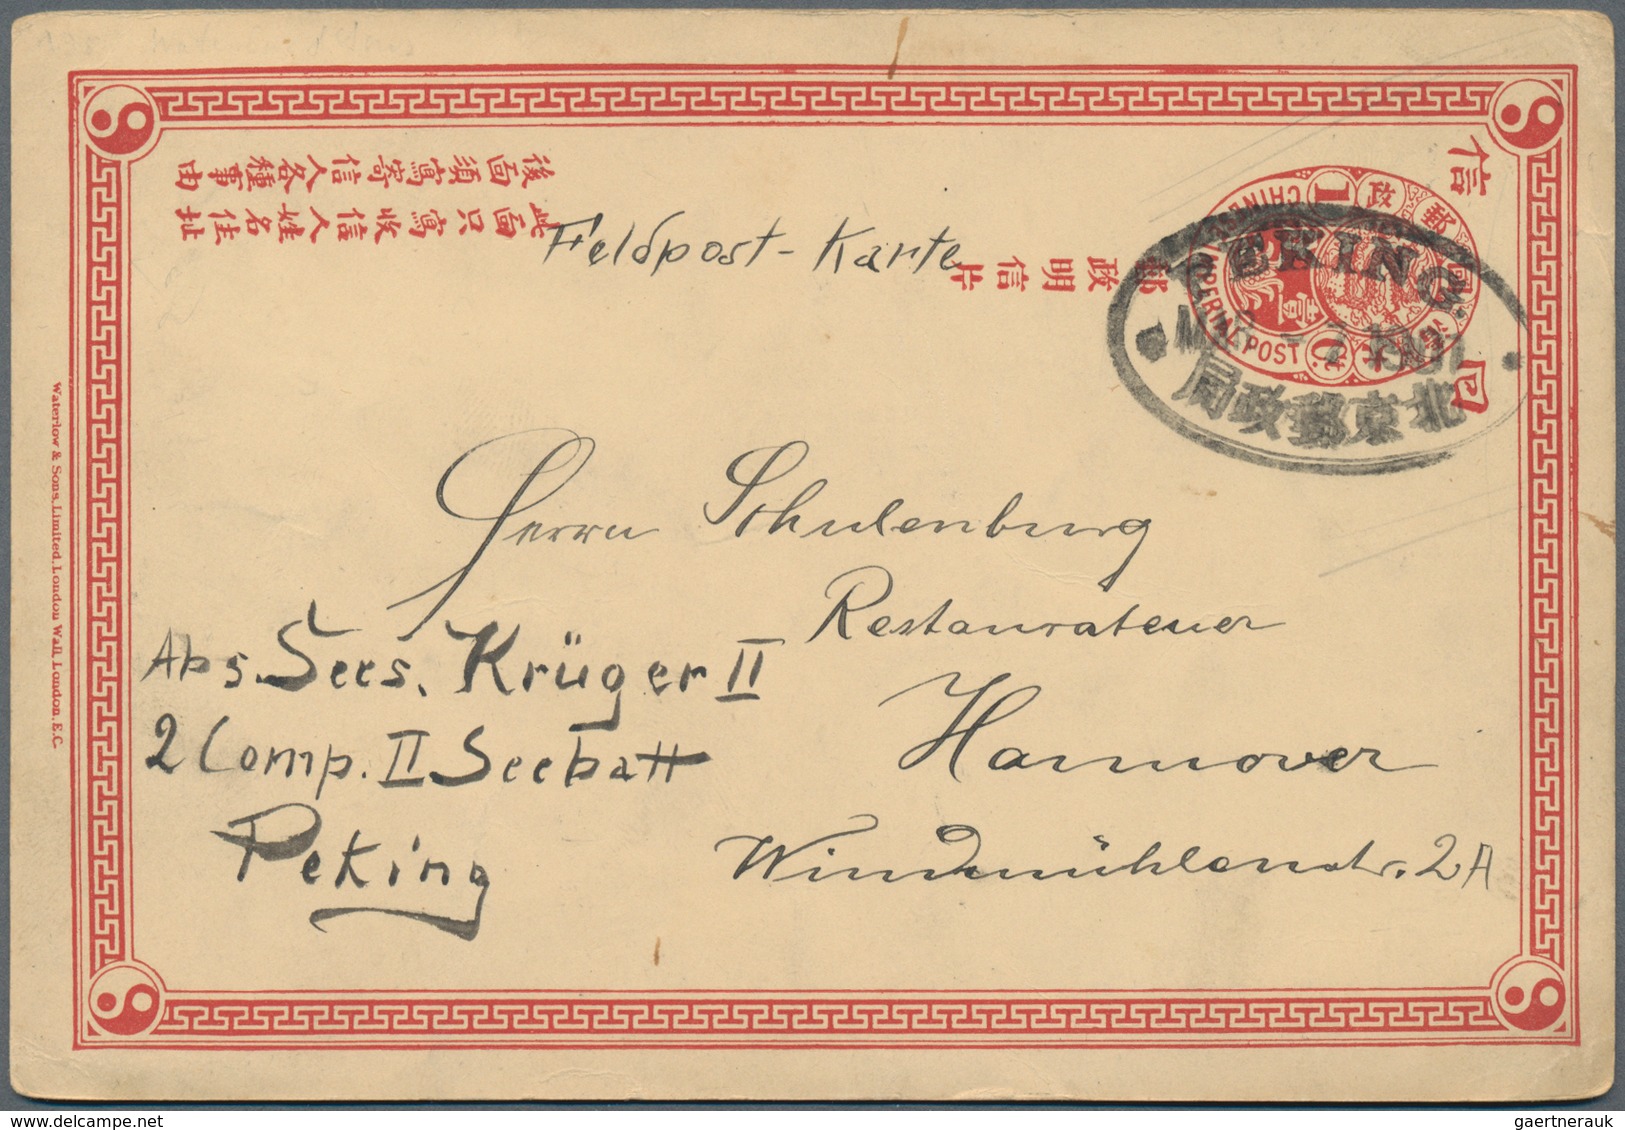 China - Ganzsachen: 1897/1908, cards ICP (1), CIP (4, inc. three reply, two used as german field pos